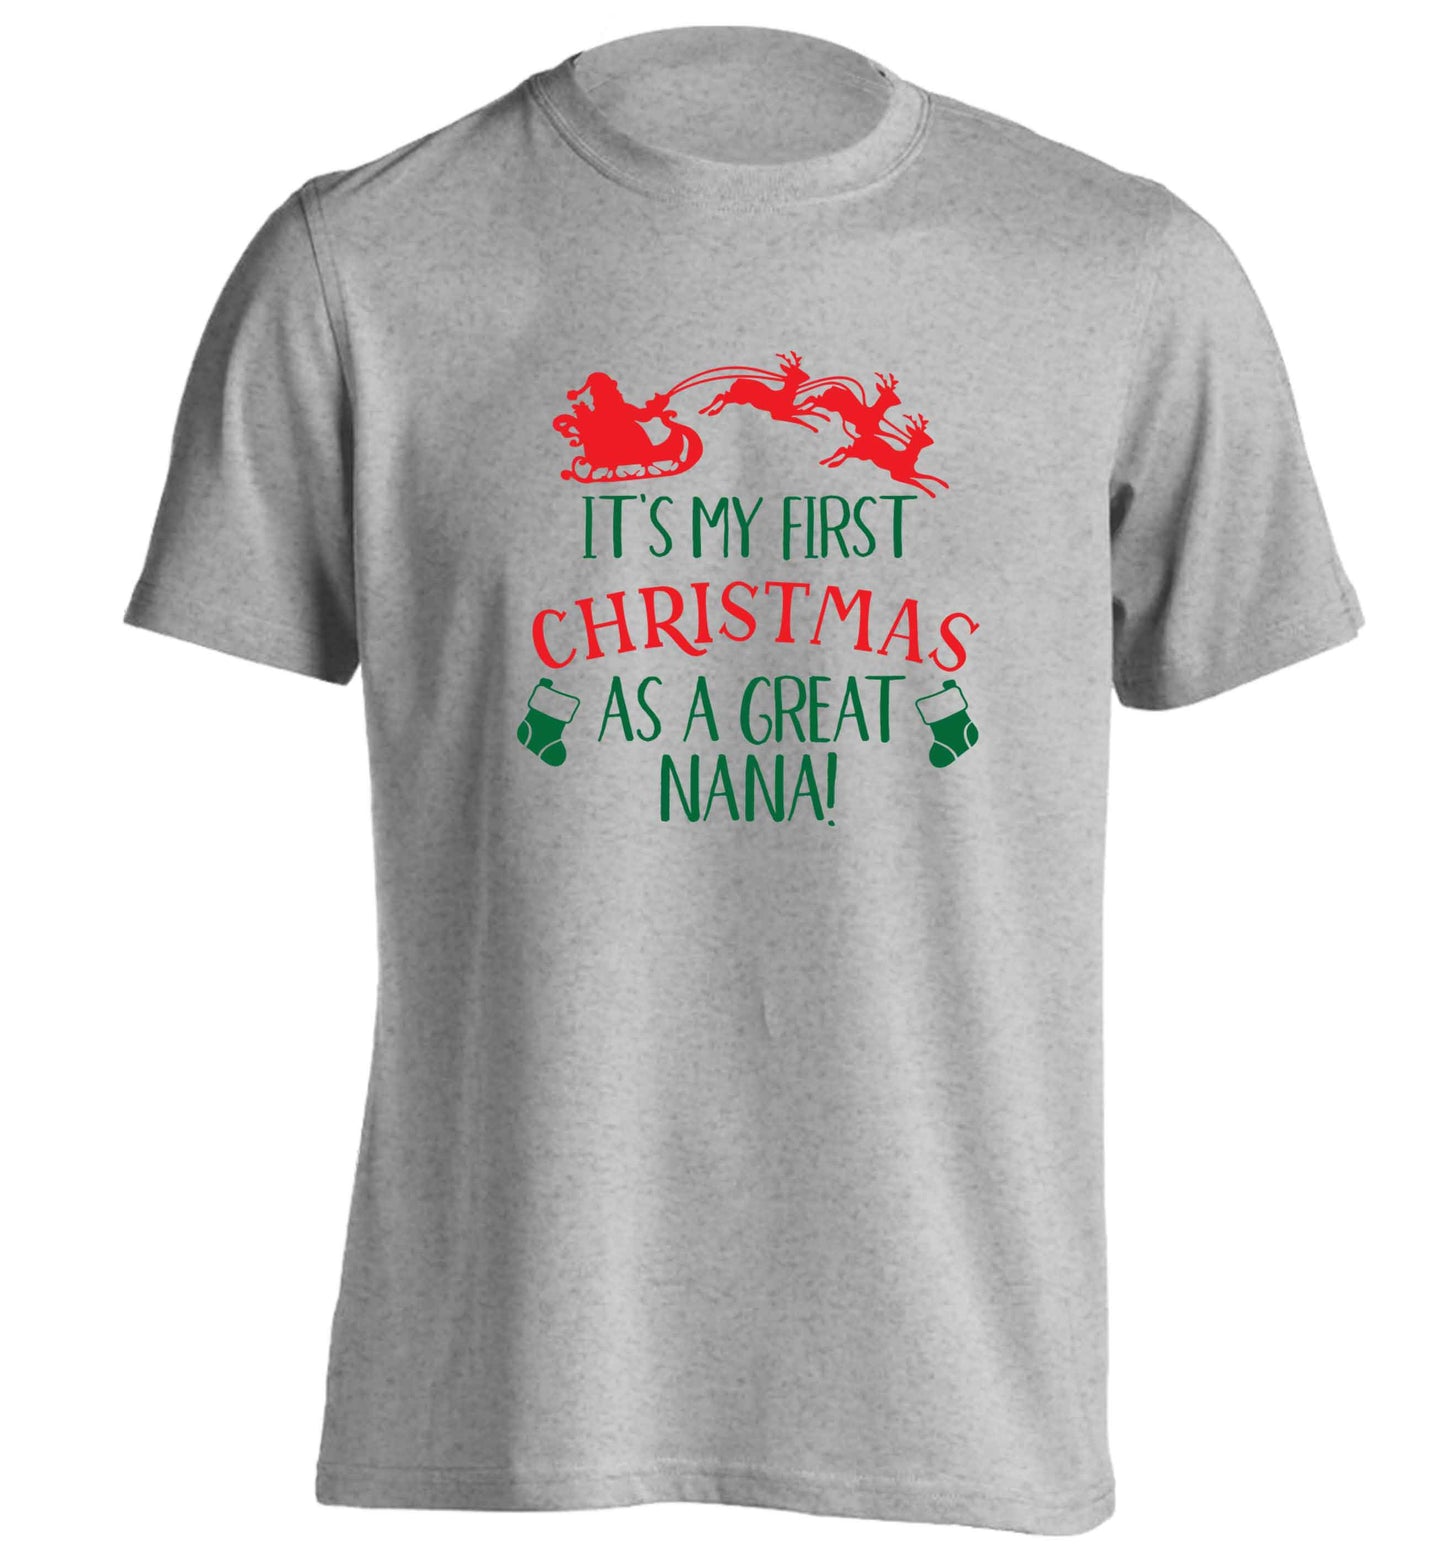 It's my first Christmas as a great nana! adults unisex grey Tshirt 2XL